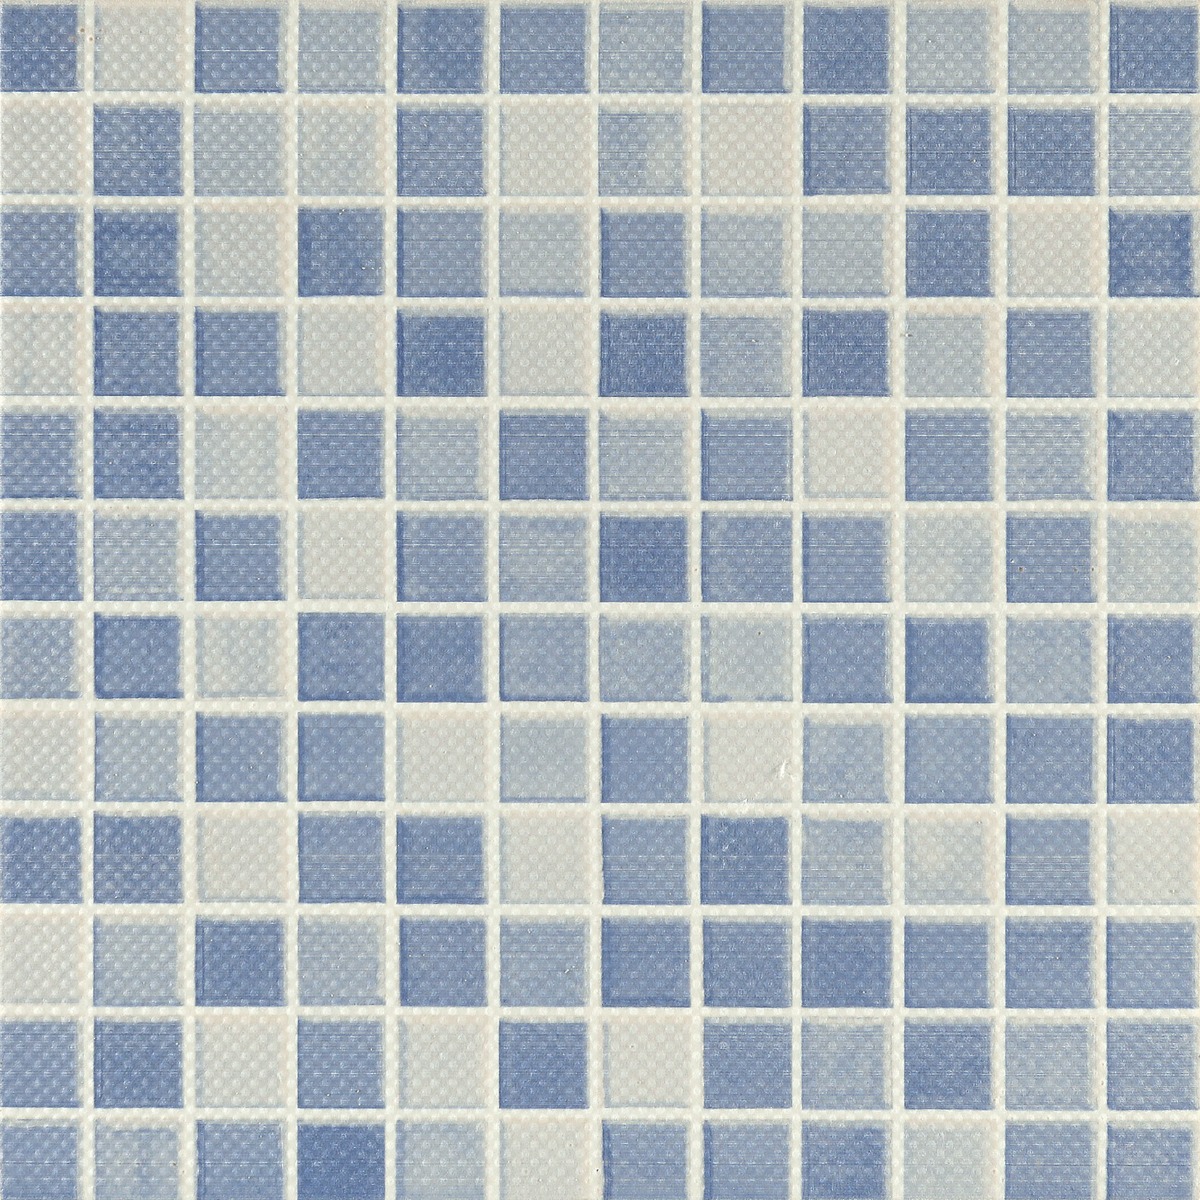 Swimming Pool Tiles for Bathroom Tiles, Balcony Tiles, Swimming Pool Tiles, Accent Tiles, Parking Tiles, Terrace Tiles, Pathway Tiles, Hospital Tiles, High Traffic Tiles, Bar/Restaurant, Commercial/Office, Outdoor Area, Outdoor/Terrace, Porch/Parking